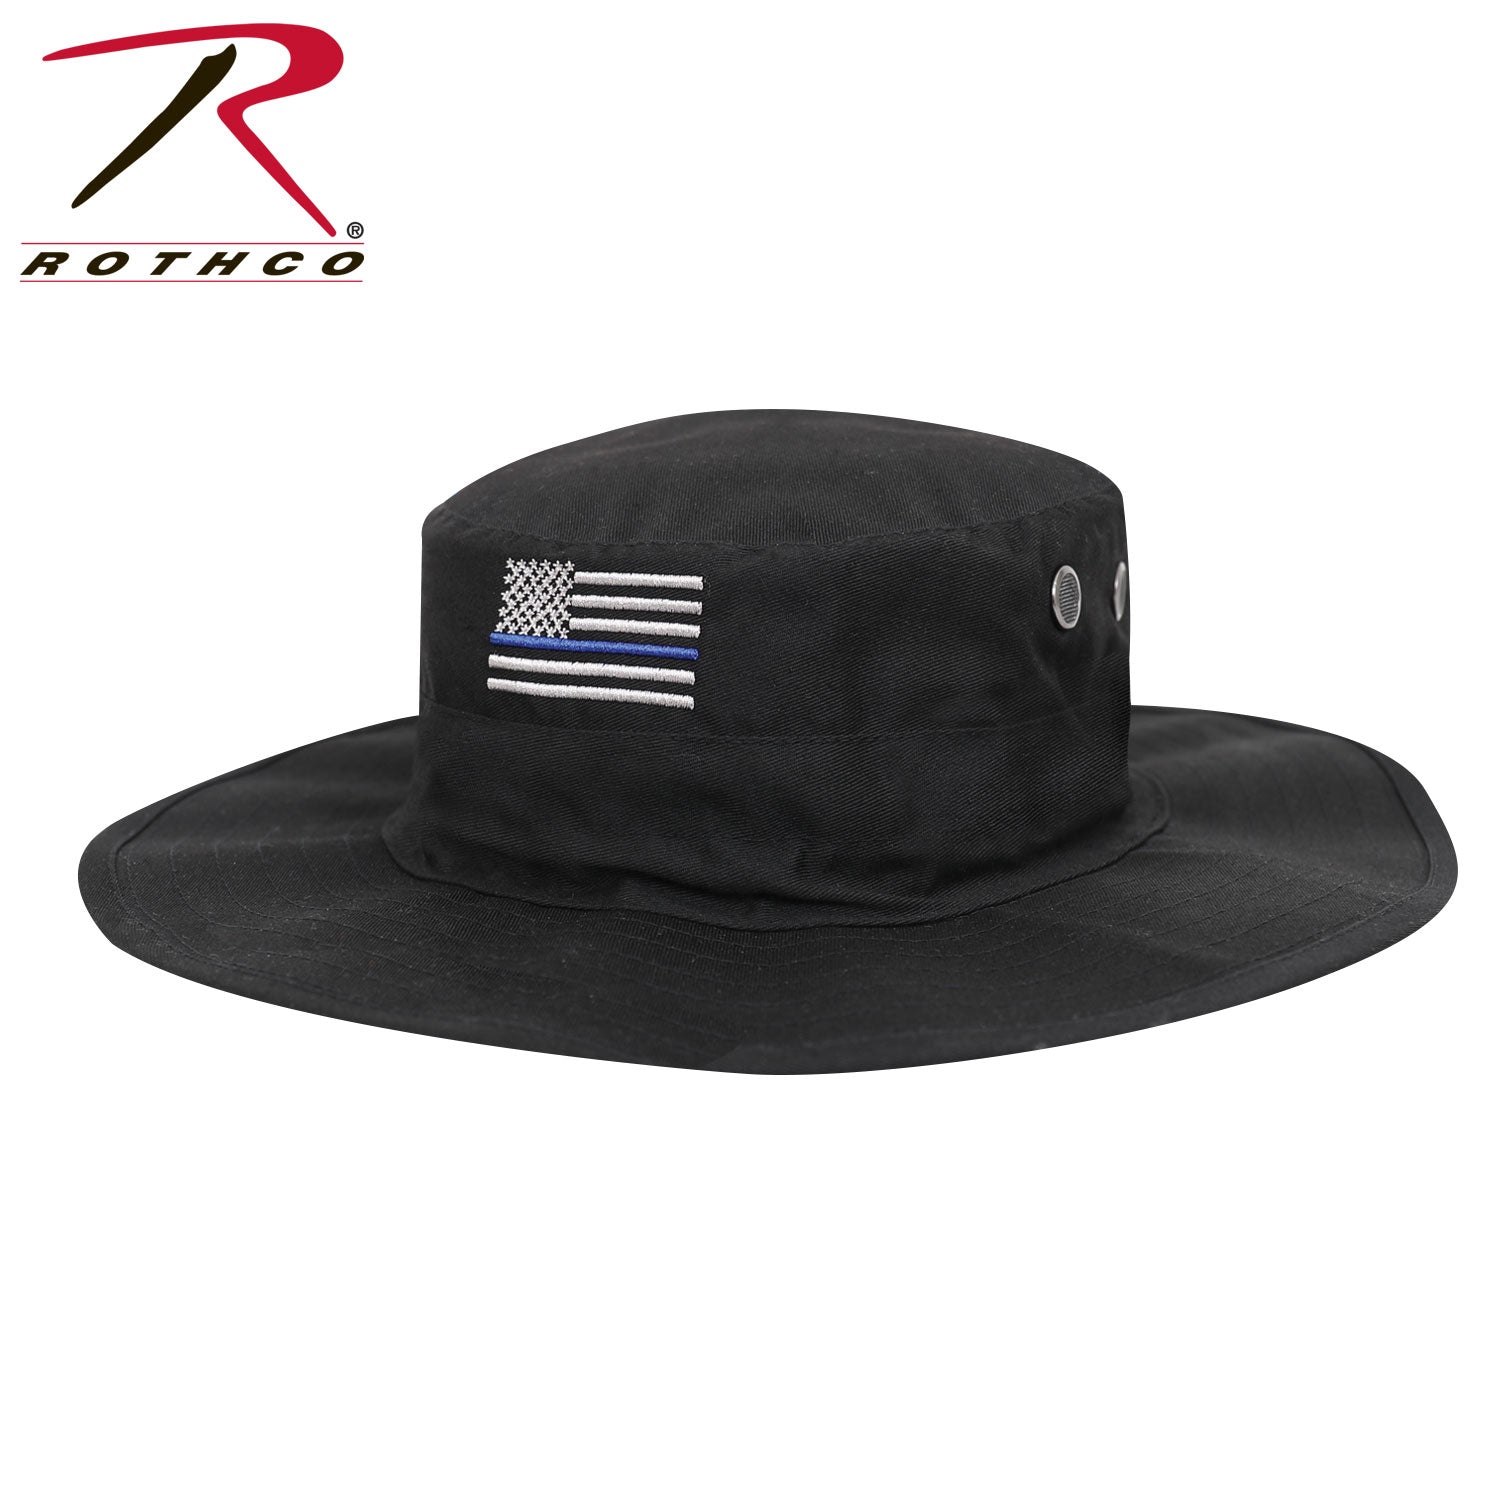 Rothco Thin Blue Line Adjustable Boonie Hat